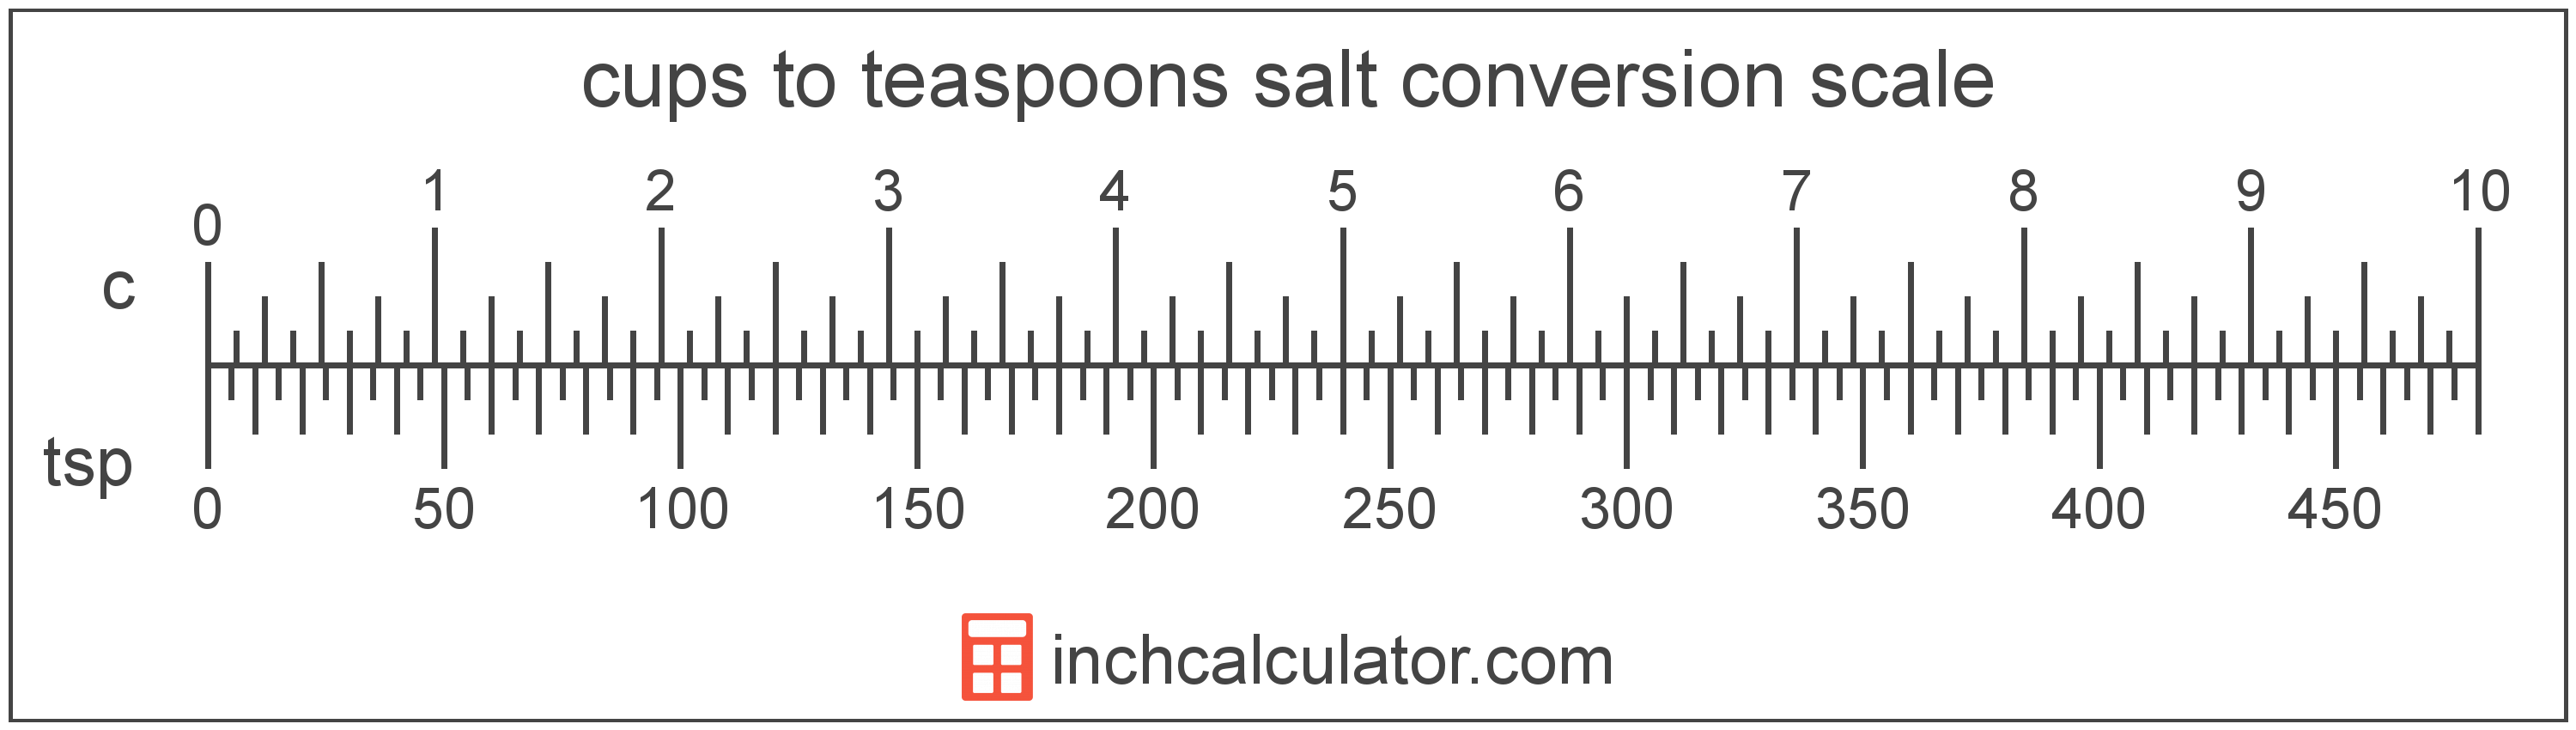 conversion scale showing teaspoons and equivalent cups amount of salt values